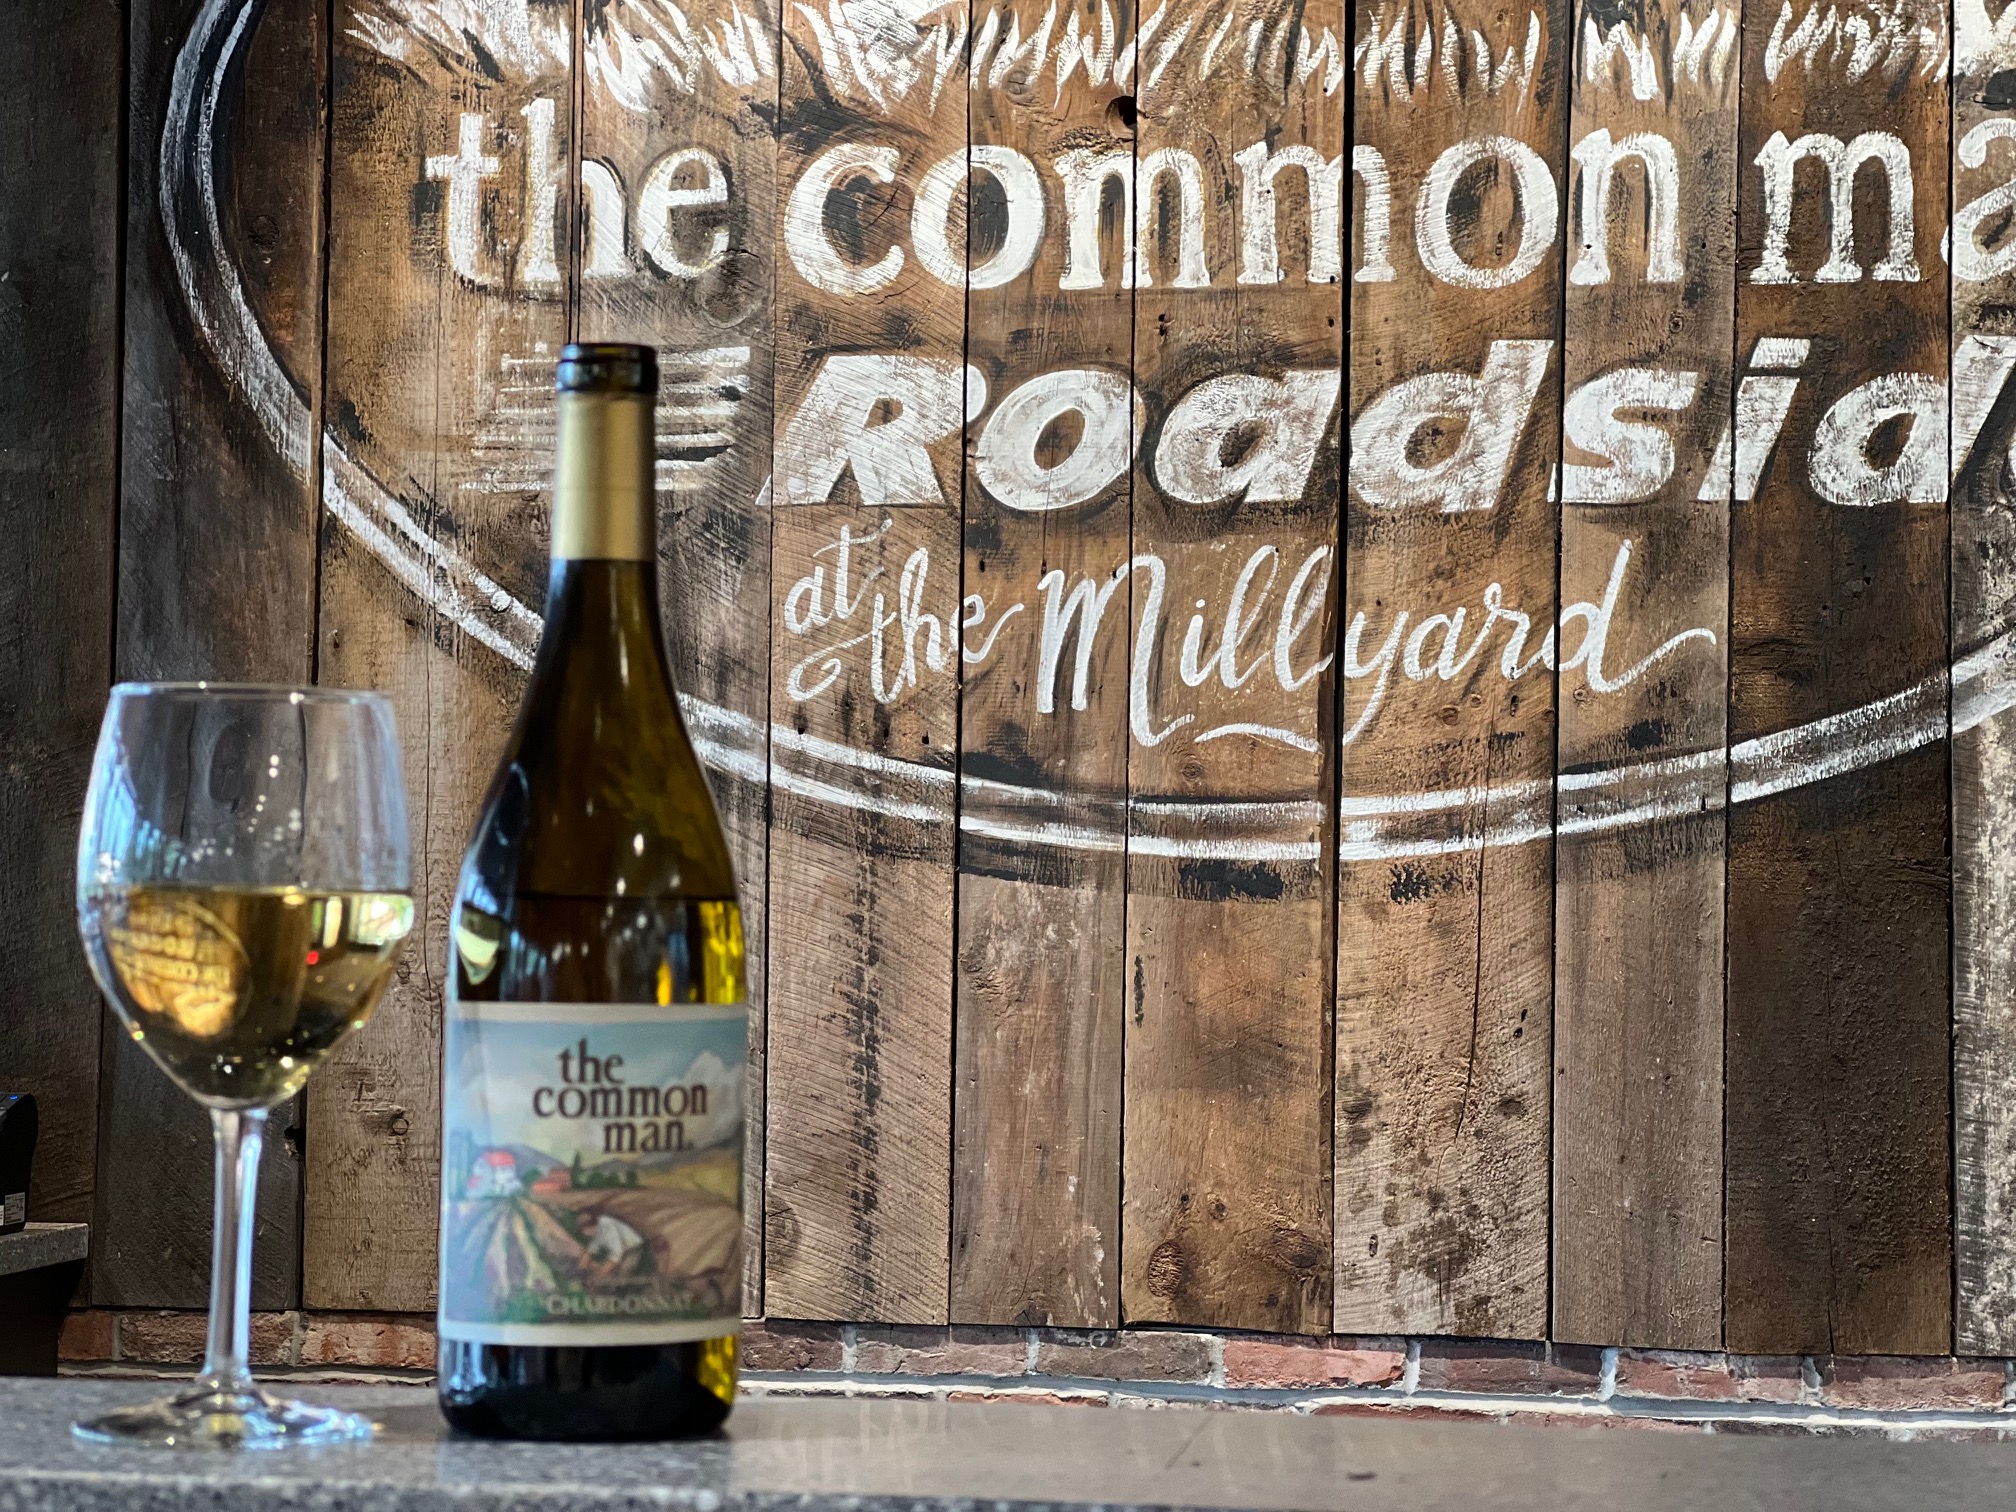 Common Man Chardonnay from The Common Man Roadside Millyard is Manchester, N.H.